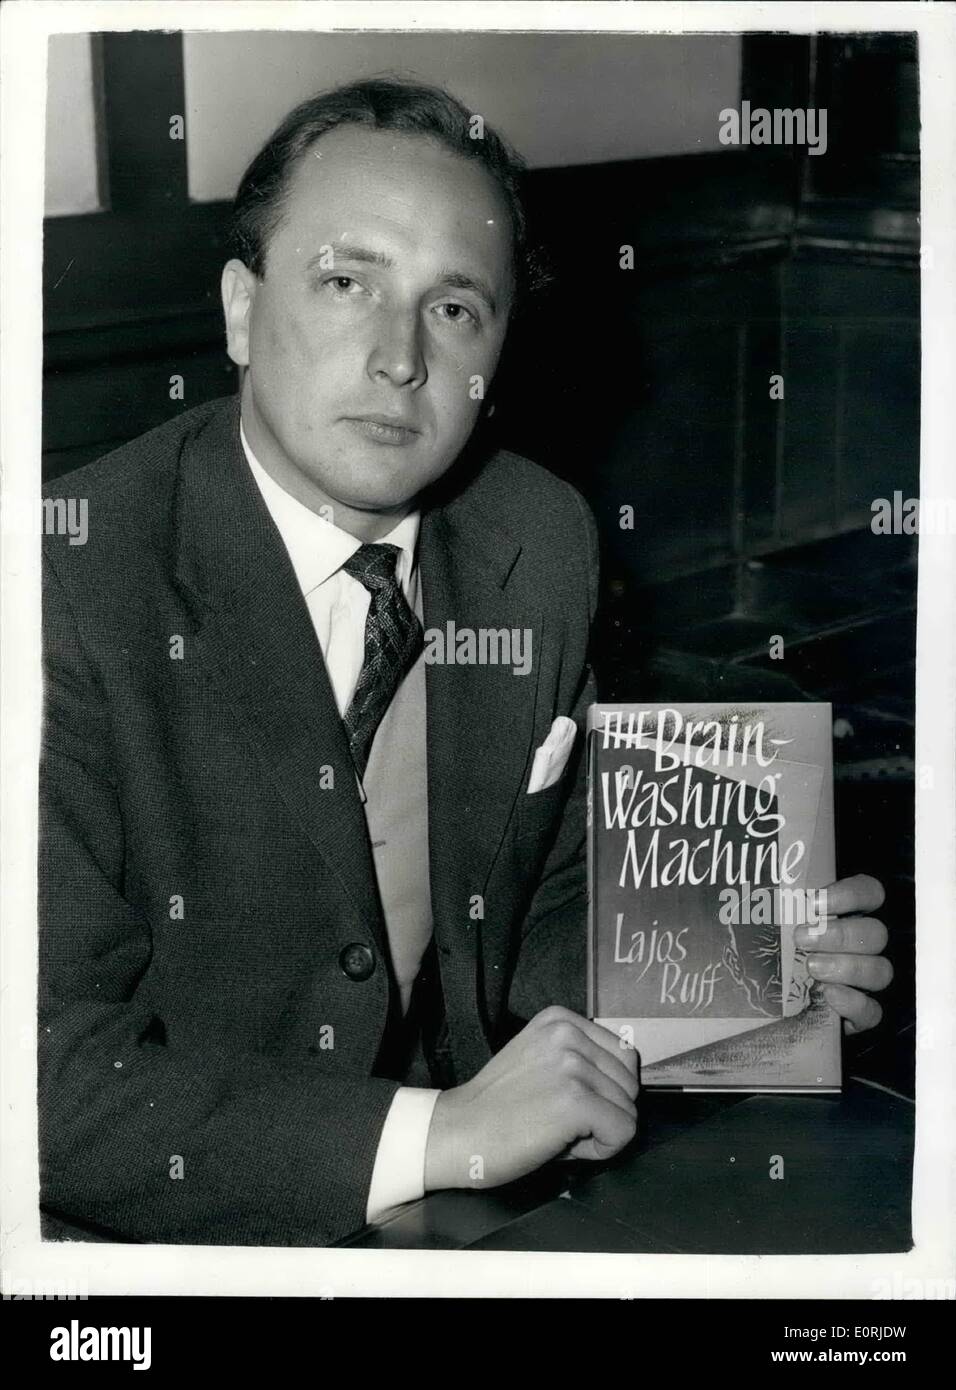 Oct. 10, 1959 - AUTHOR WHO ESCAPED FROM HUNGARY - HOLDS PRESS CONFERENCE ON NEW BOOK ''THE BRAIN WASHING MACHINE'', LAJOS RUFF the young Hungarian author of the sensational soon .The Brain Washing Machine'' - held a press conference in London today. It is a story of the Communist brain-washing process by which the will of the victim is broken down,. The author is one of the very few to undergo this treatment - and to survive - sane.. KEYSTONE PHOTO SHOWS:- LAJOS RUFF with the book during the press conference today. Stock Photo